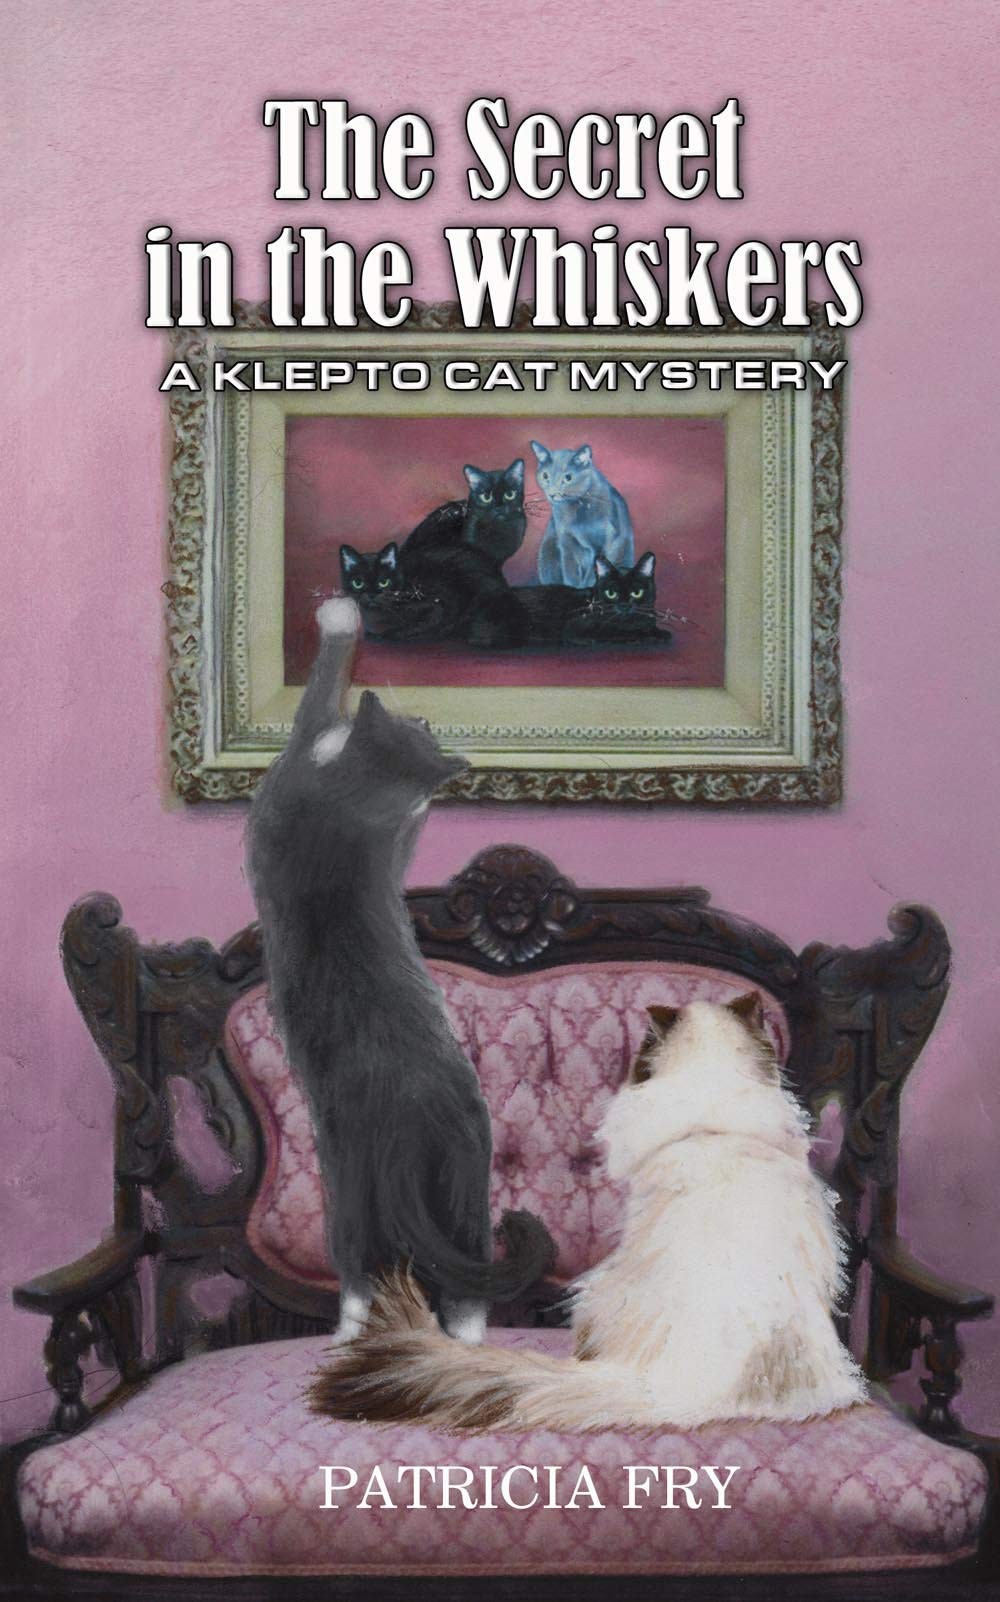 The Secret in the Whiskers